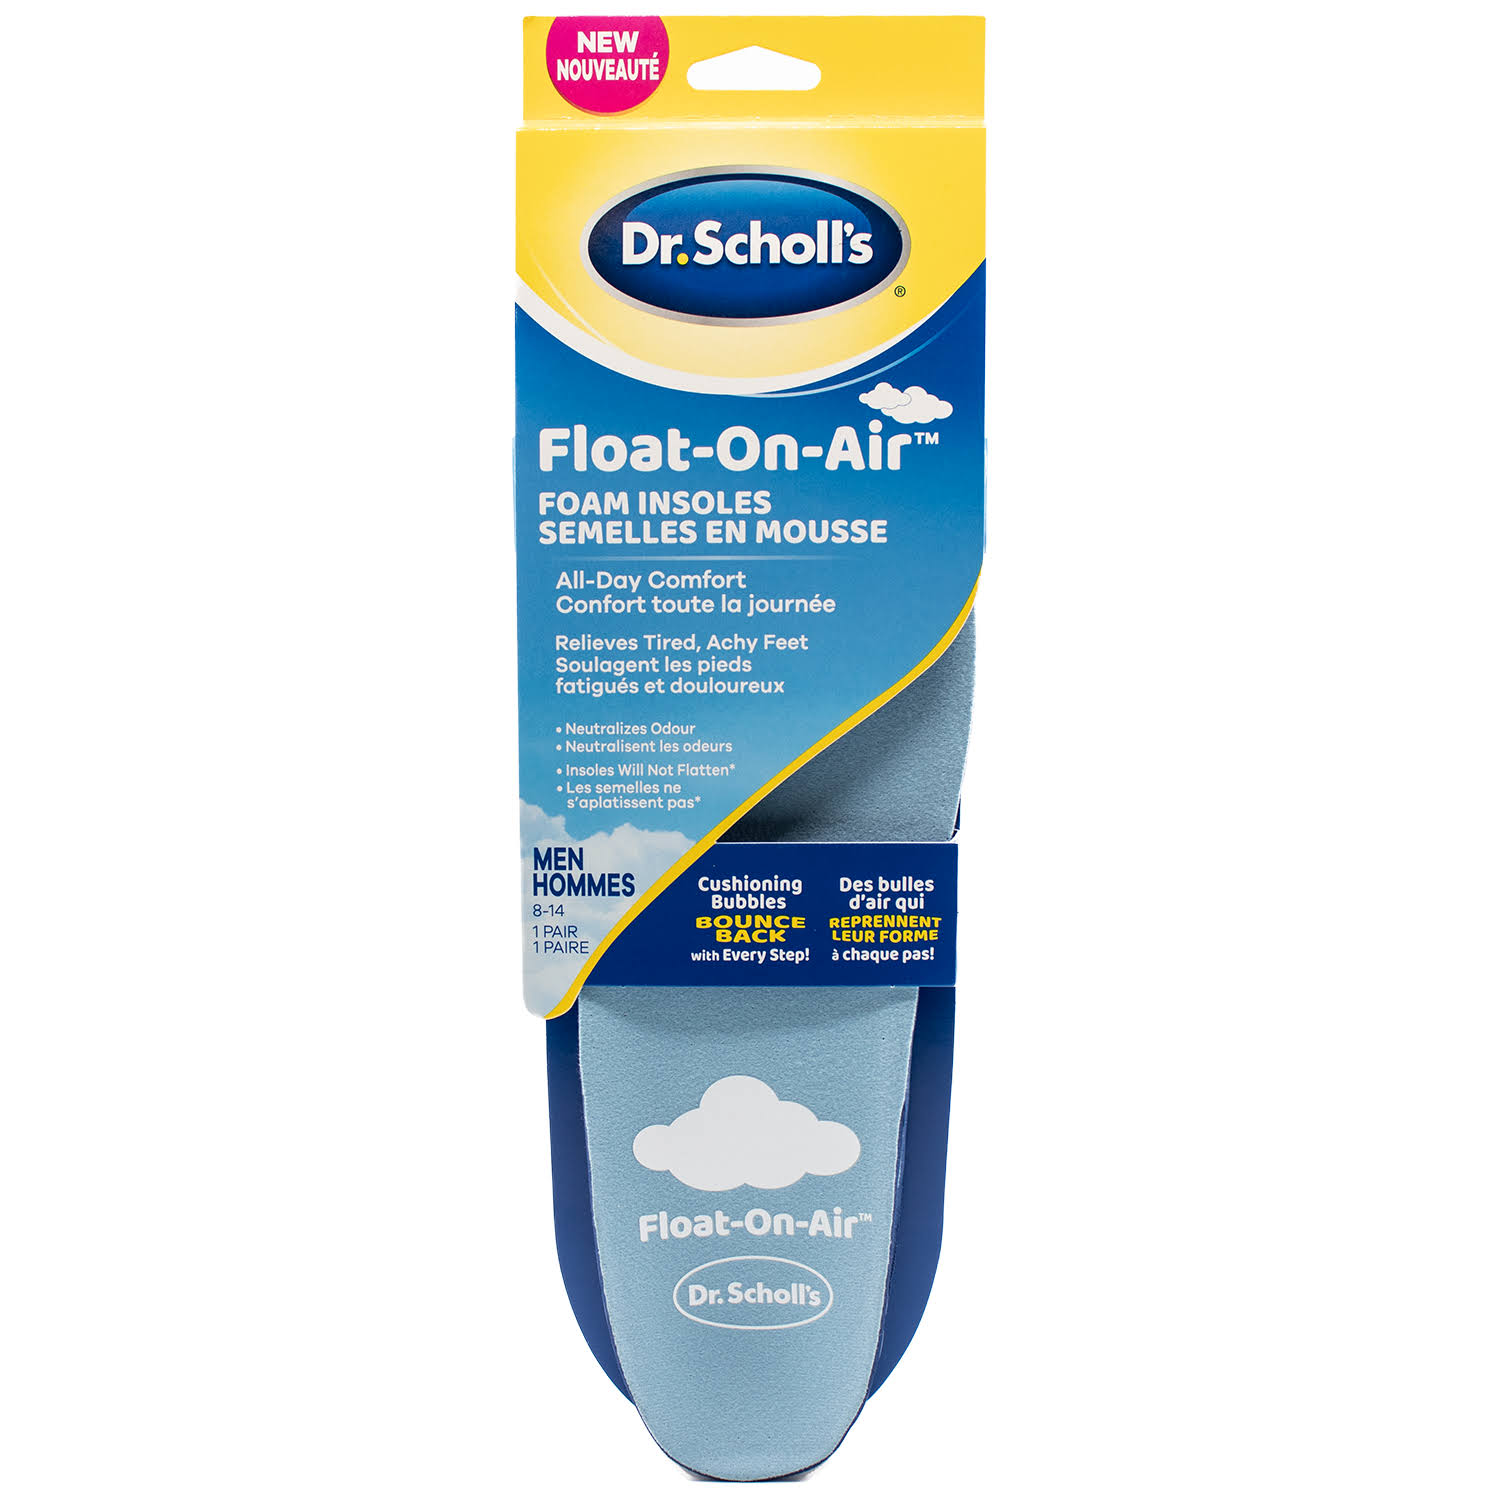 Dr. Scholl's Float-On-Air Foam Insoles, All-Day Comfort Relieves Tired, Achy Feet (FOR Men's 8-14, Also Available for Women's 6-10) Blue 1 Count (Pack